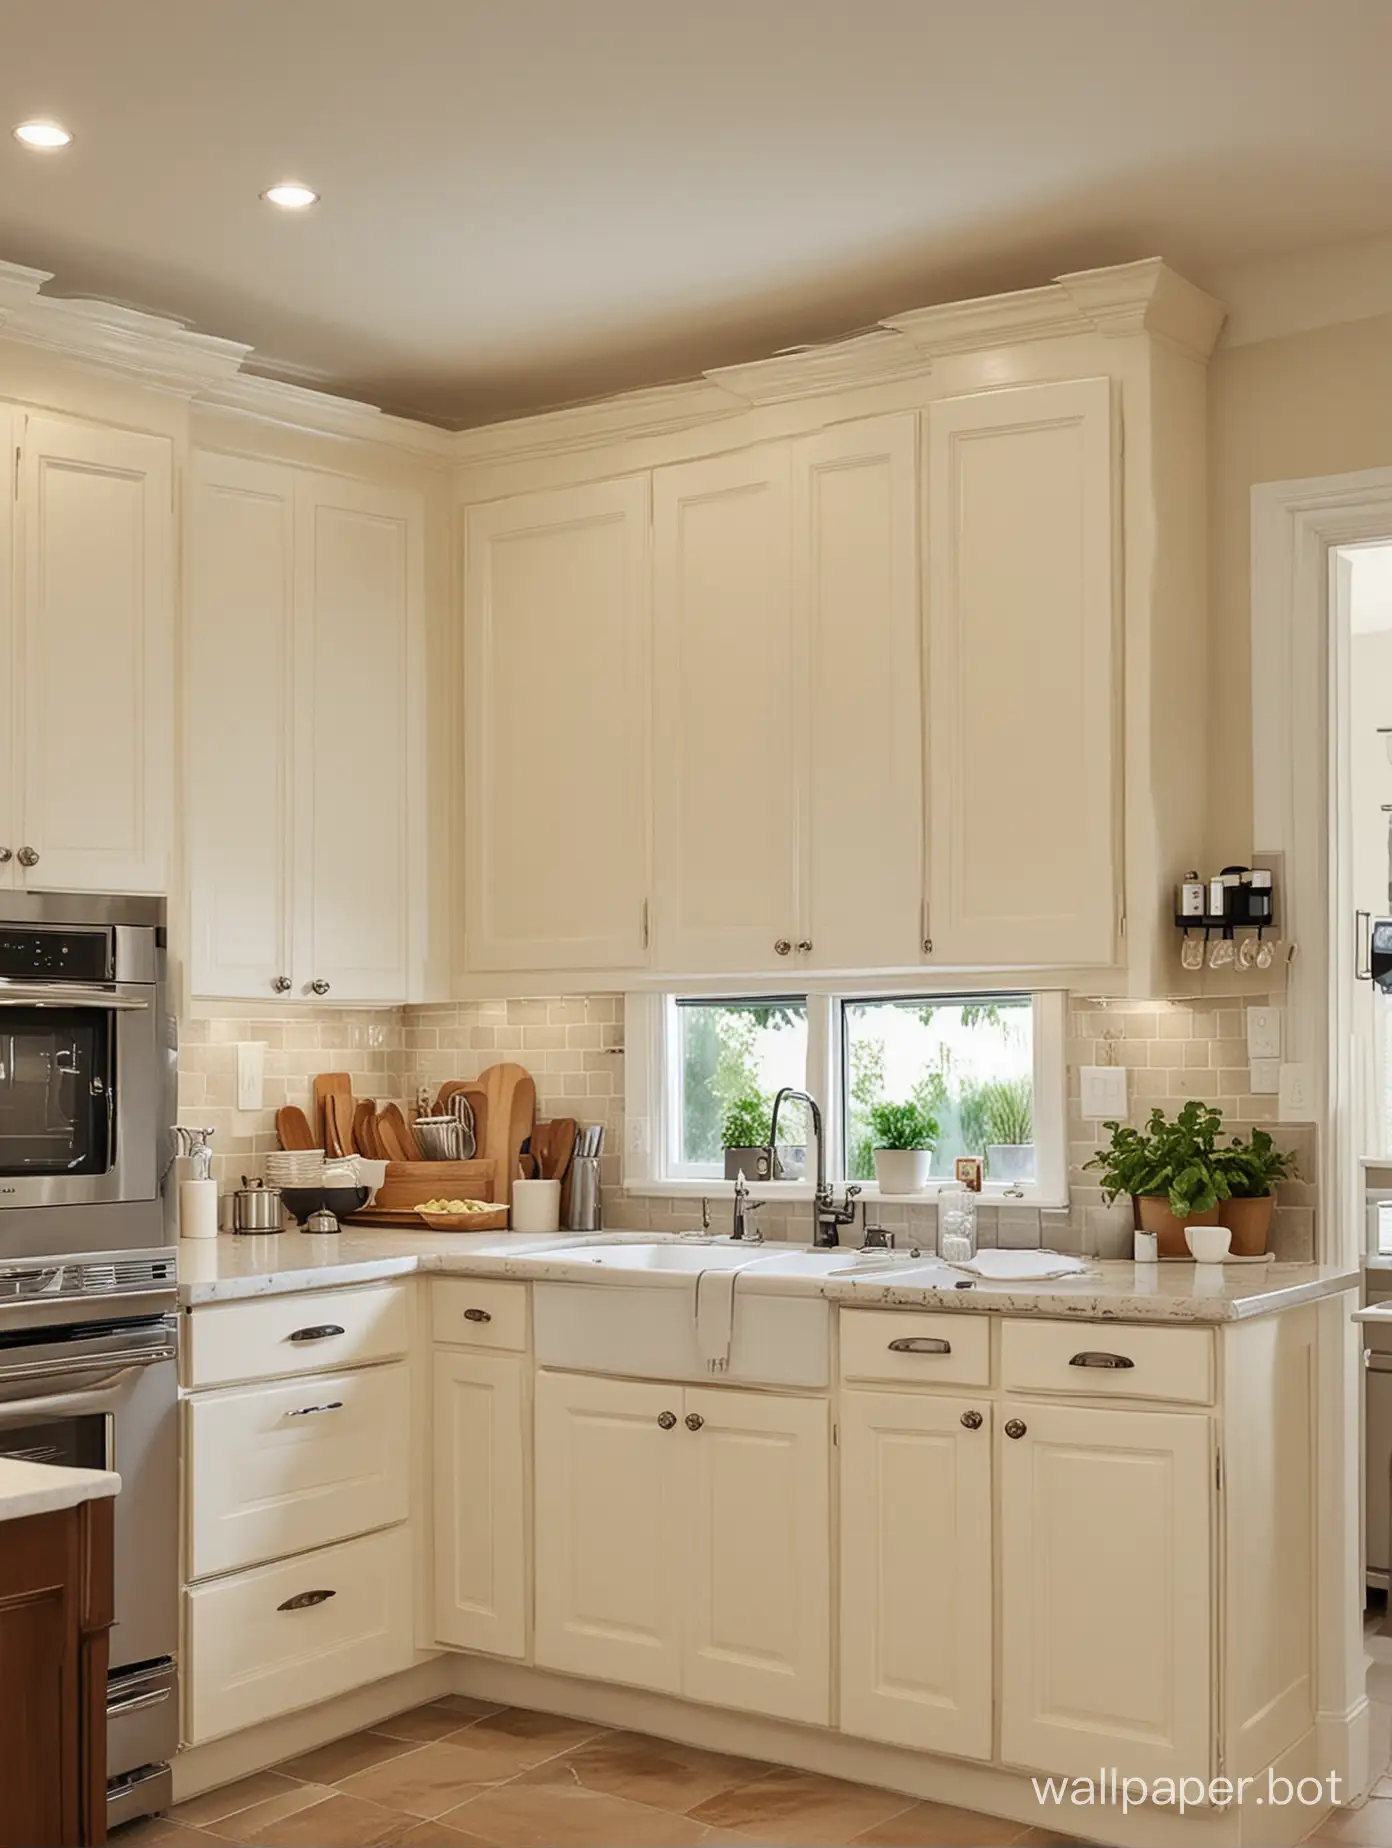 Generate a kitchen, requiring a lighter color, just need one kitchen